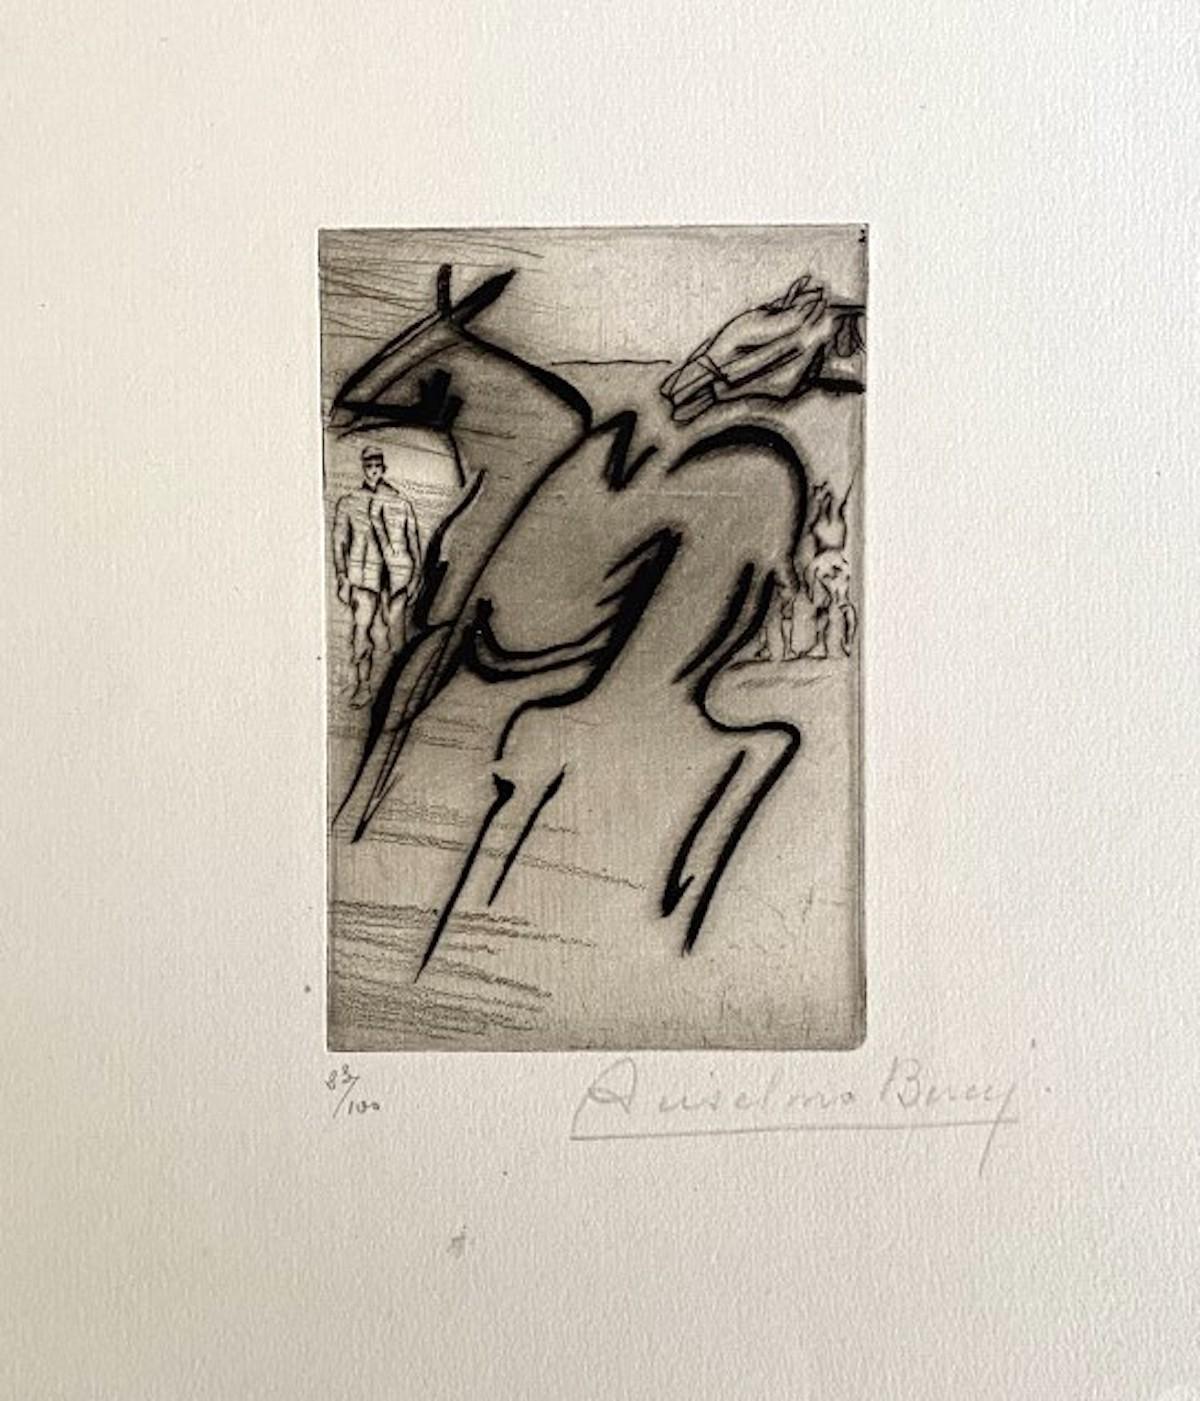 "Militant" is a beautiful etching, realized by Anselmo Bucci (1887-1955).

Hand signed and numberd. Copy 25 from an edition of 100 prints. On the lower right corner, an iscription written in pencil, Le Comp de canon.

Image Dimensions: 13 x 8.5